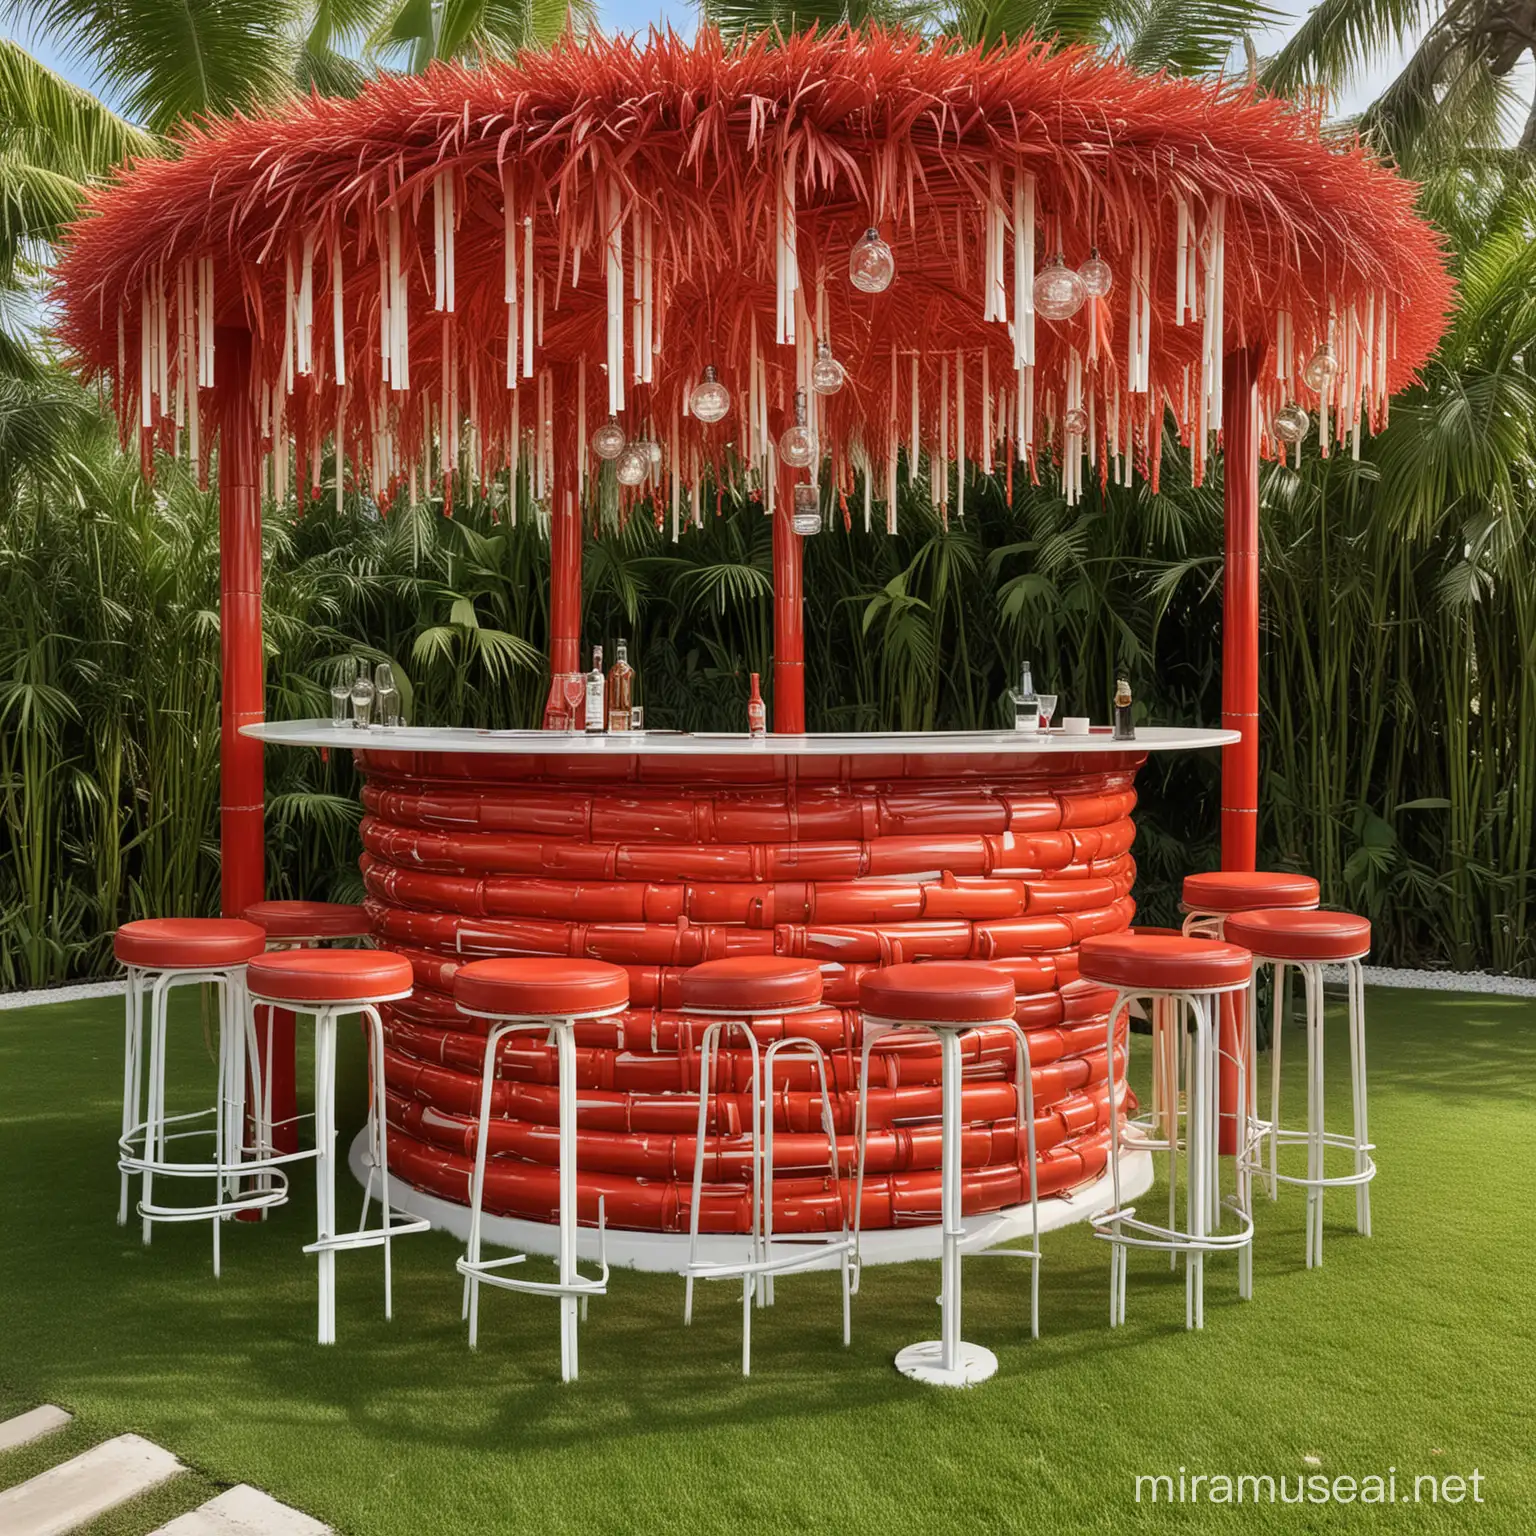 Vibrant Red Bamboo Martini Bar with Hanging Lights and Palm Trees